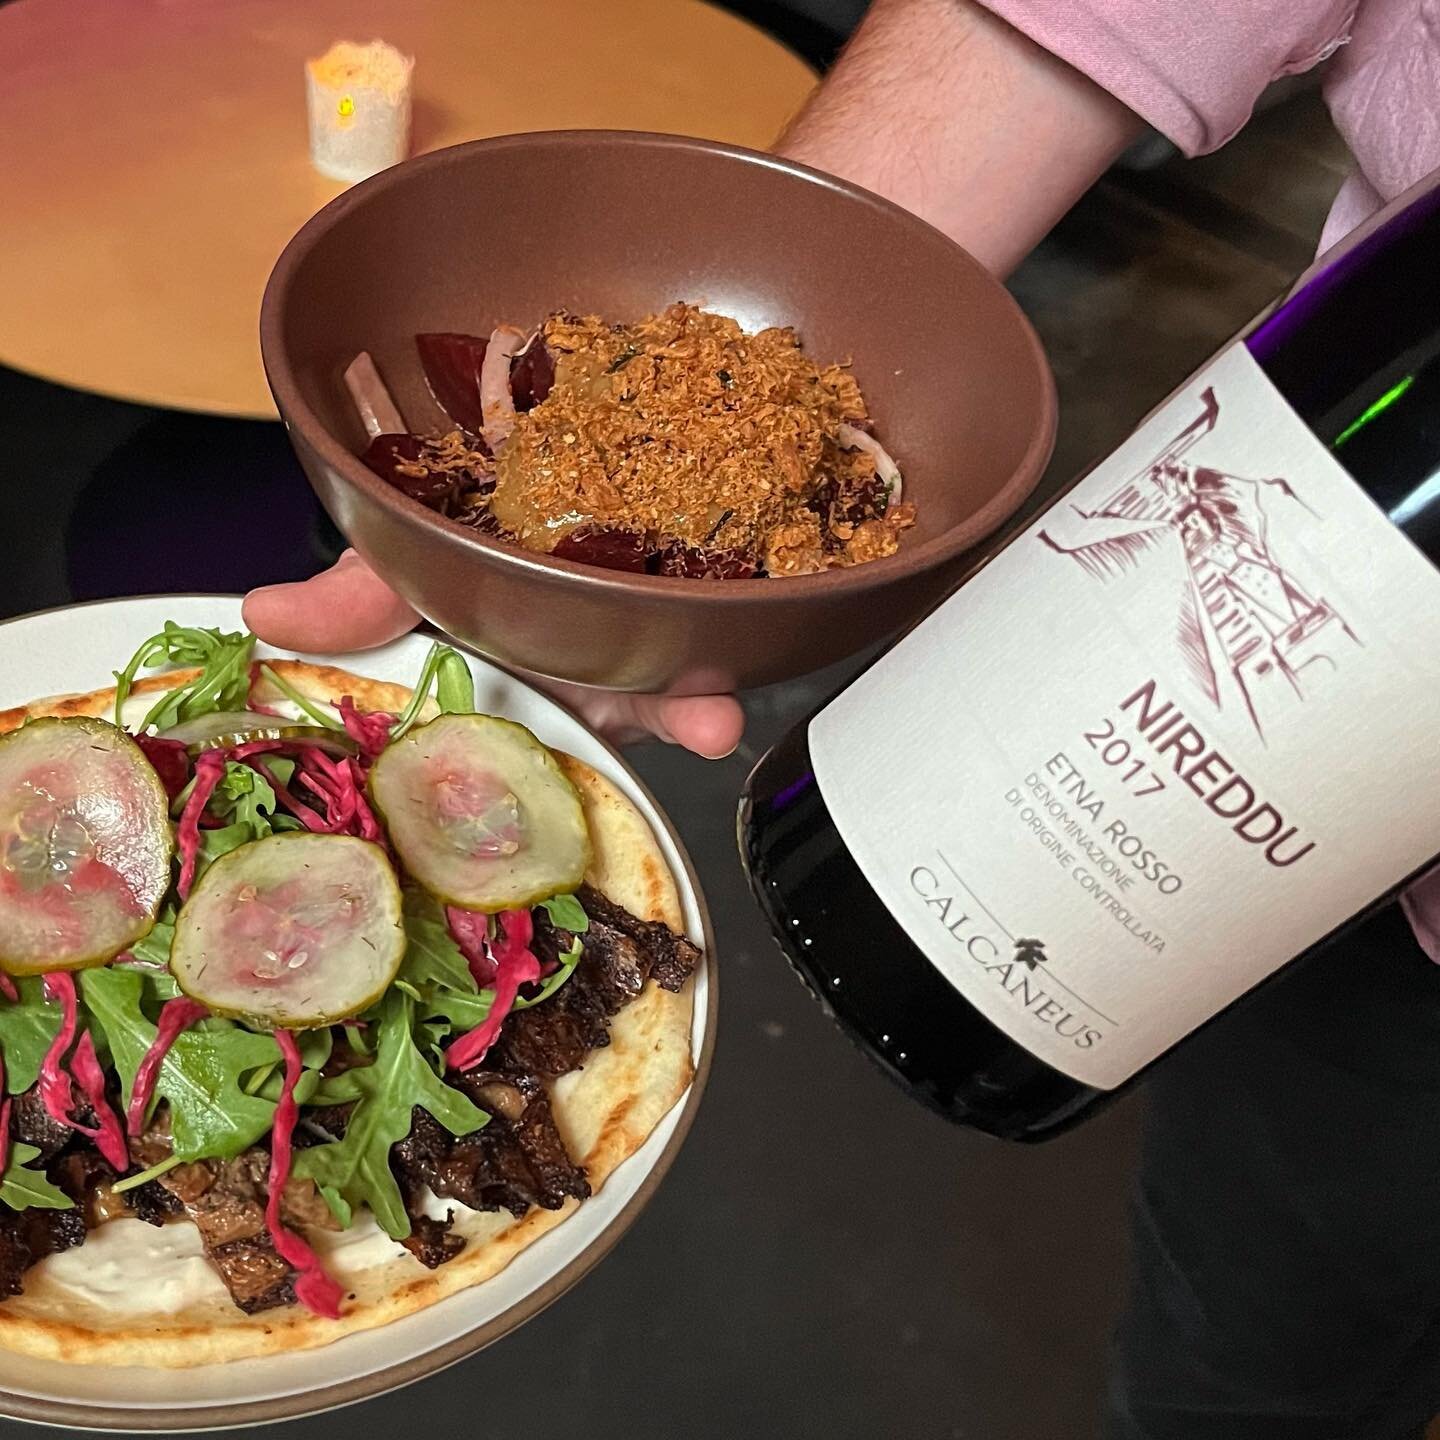 Nireddu 2017 Etna Rosso - Pairs perfect with our Yuba Shawarma and Beets. We also got @caren__ep dj&rsquo;ing tonight, come by!